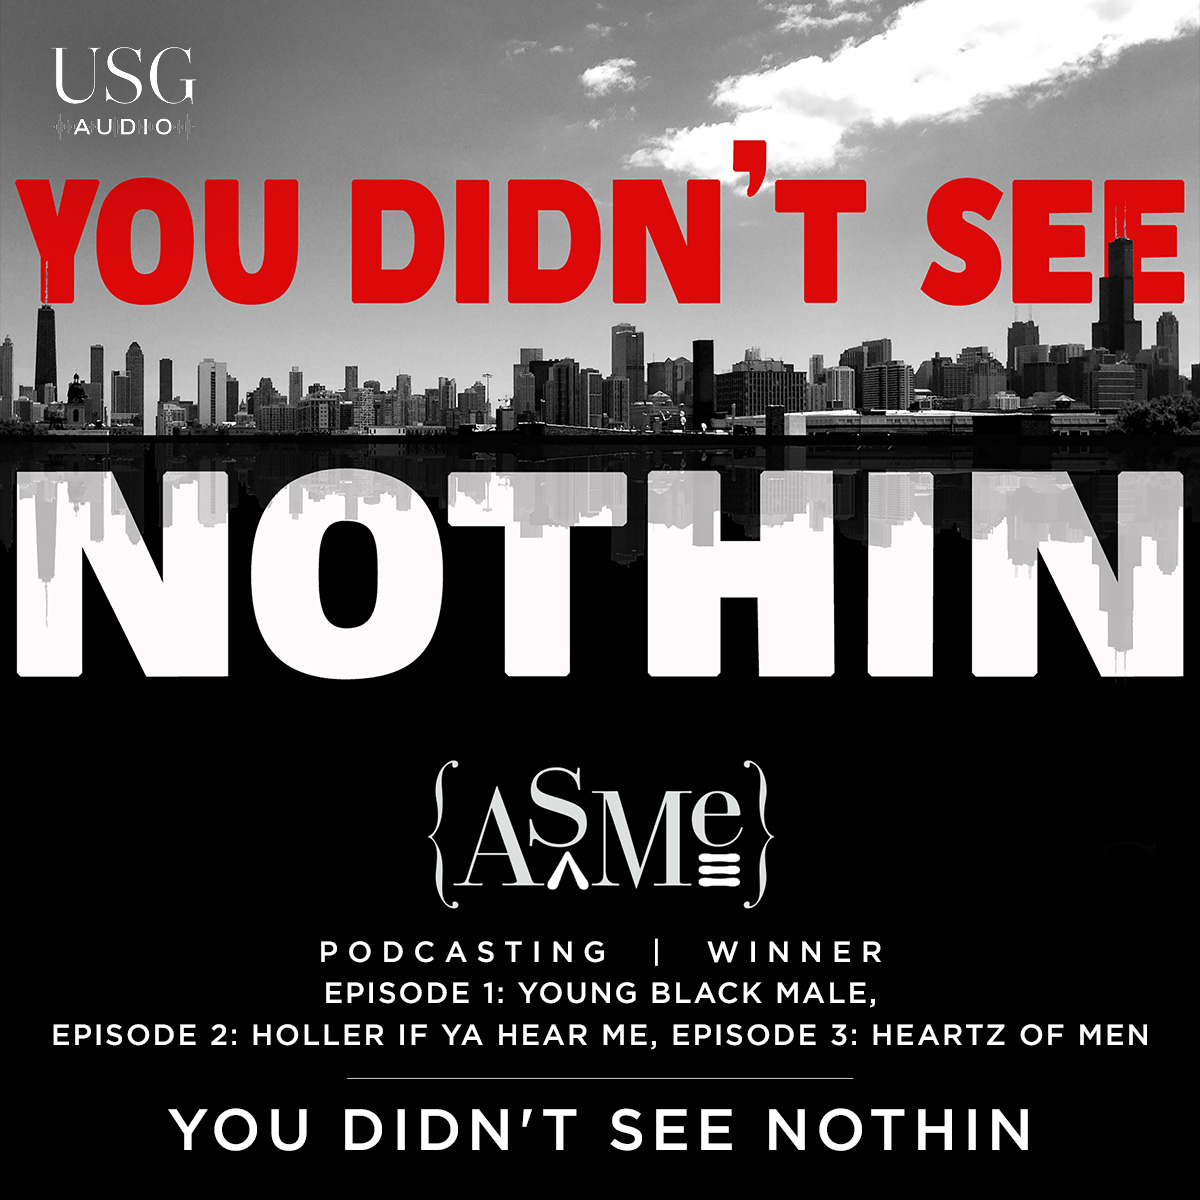 Congratulations to USG Audio and Invisible Institute’s You Didn’t See Nothin on their win at this year's National Magazine Awards! The American Society of Magazine Editors recognizes magazine storytelling published in any print or digital medium.